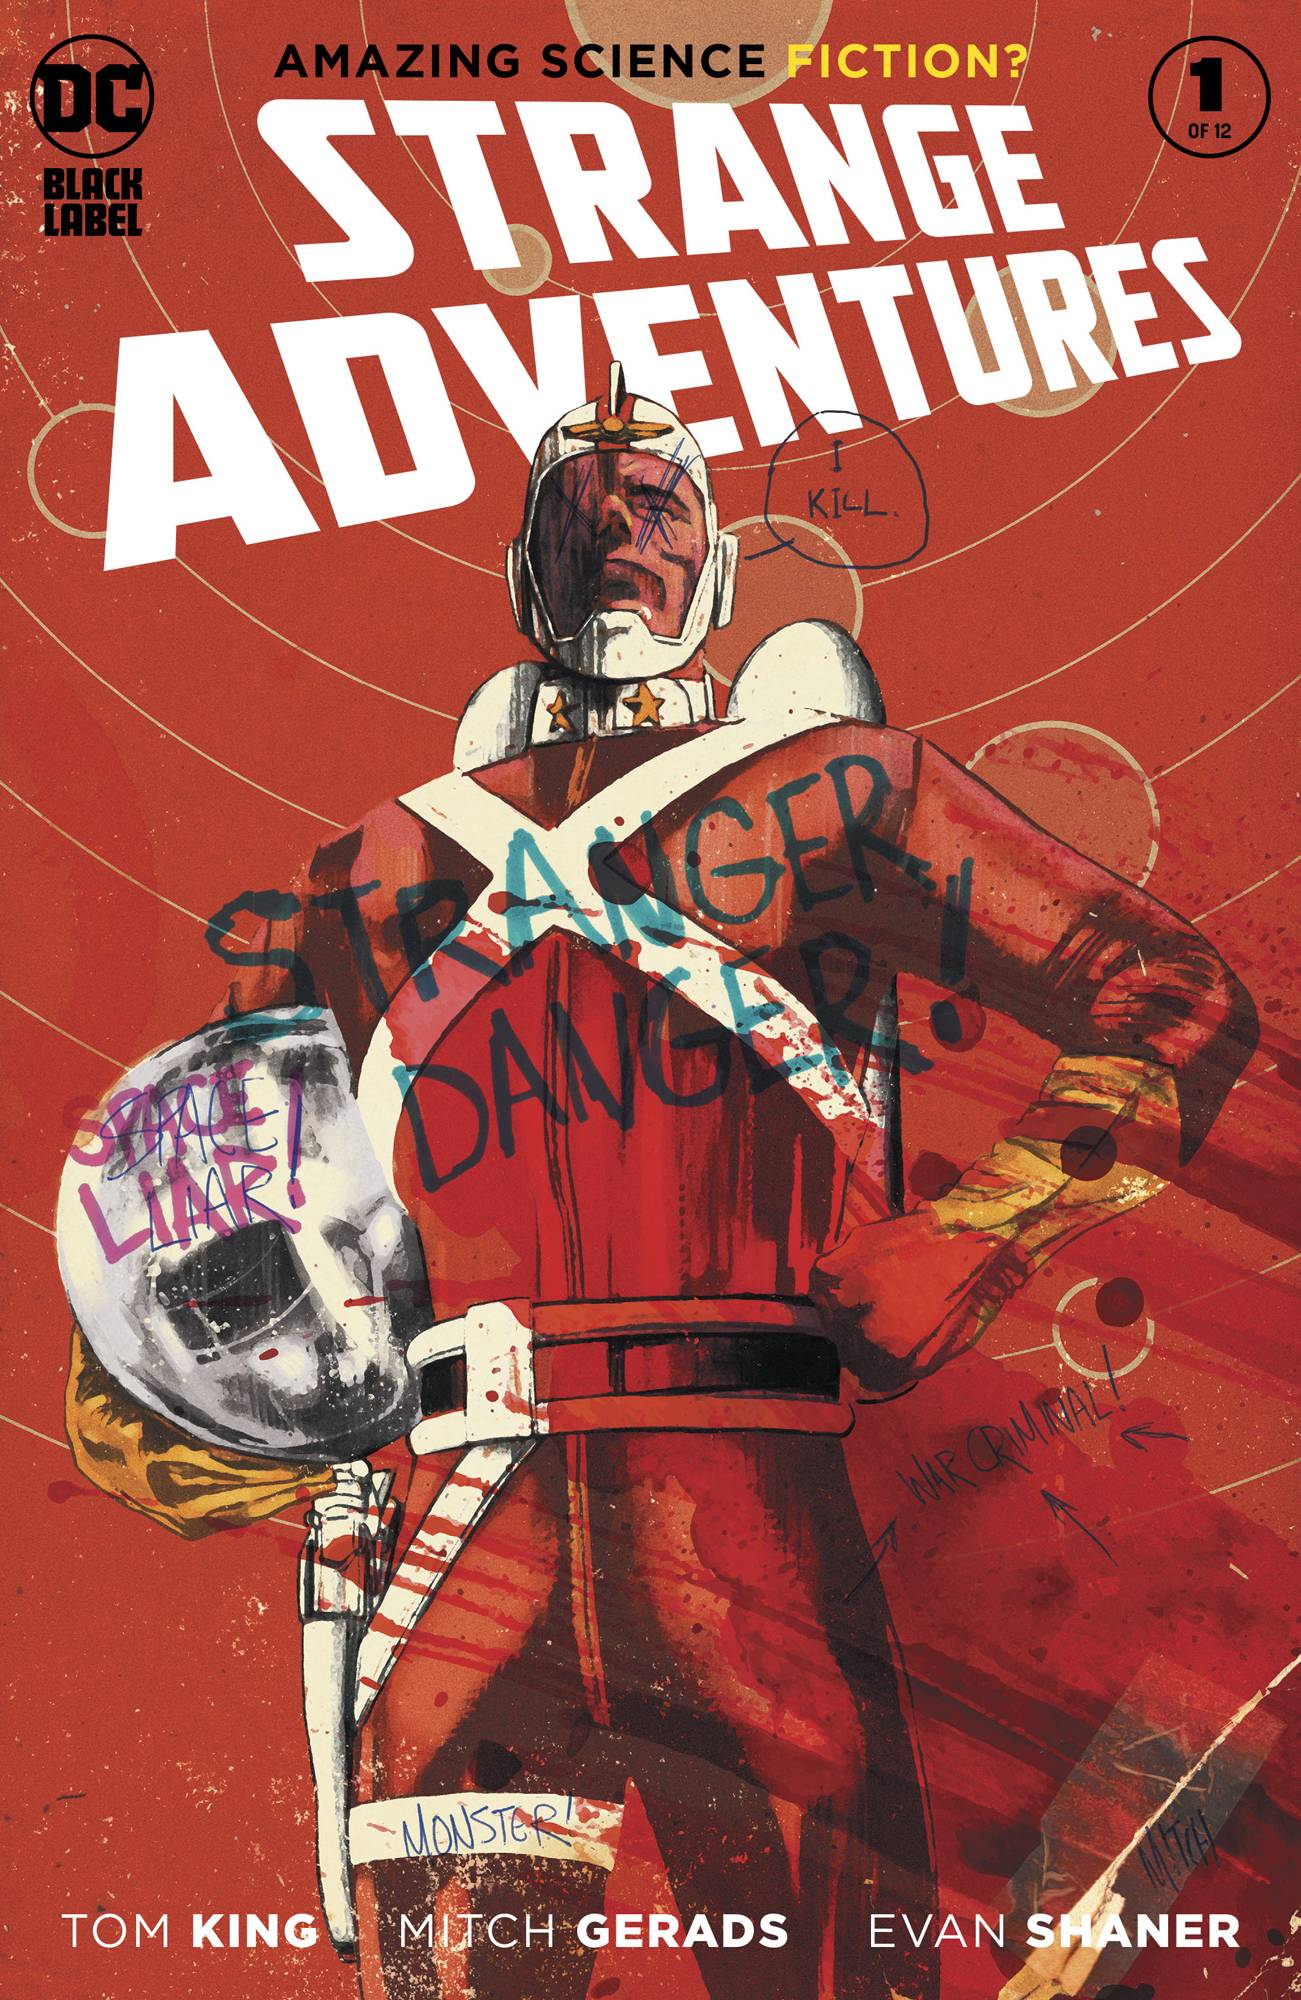 Photo of Strange Adventures Issue 1 (of 12) comic sold by Stronghold Collectibles